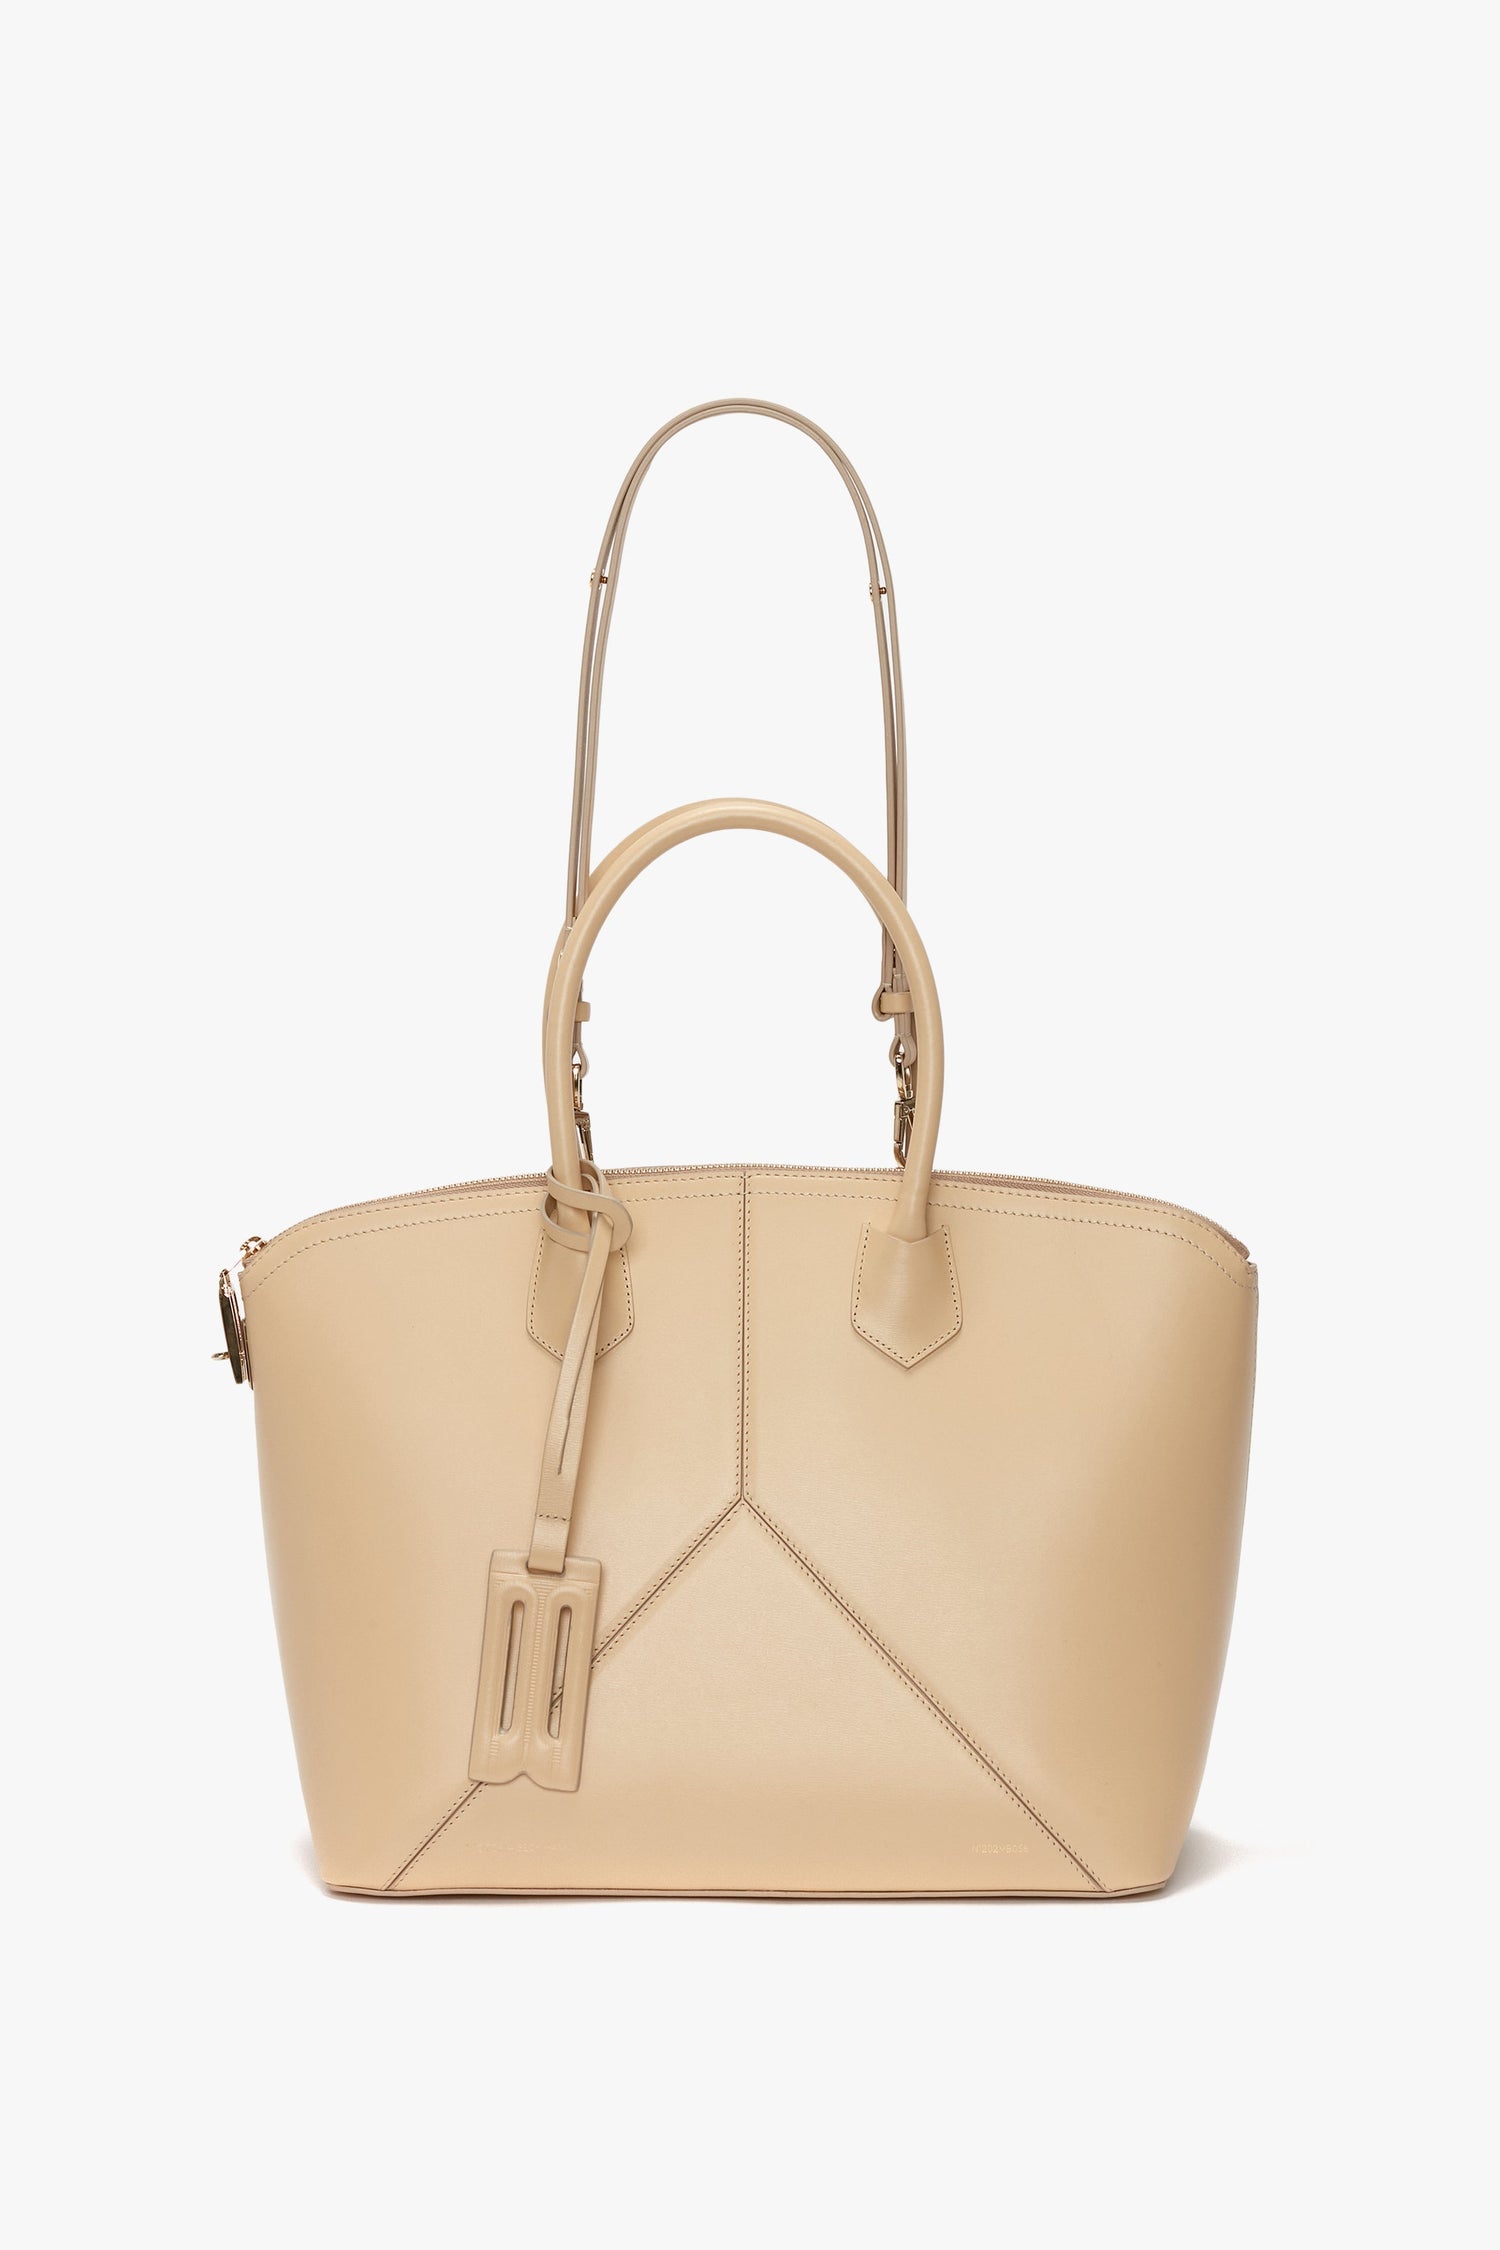 A tan Victoria Beckham Victoria Bag In Sesame Leather featuring dual handles, a detachable and adjustable shoulder strap, and elegant leather panels with a small tag attached.